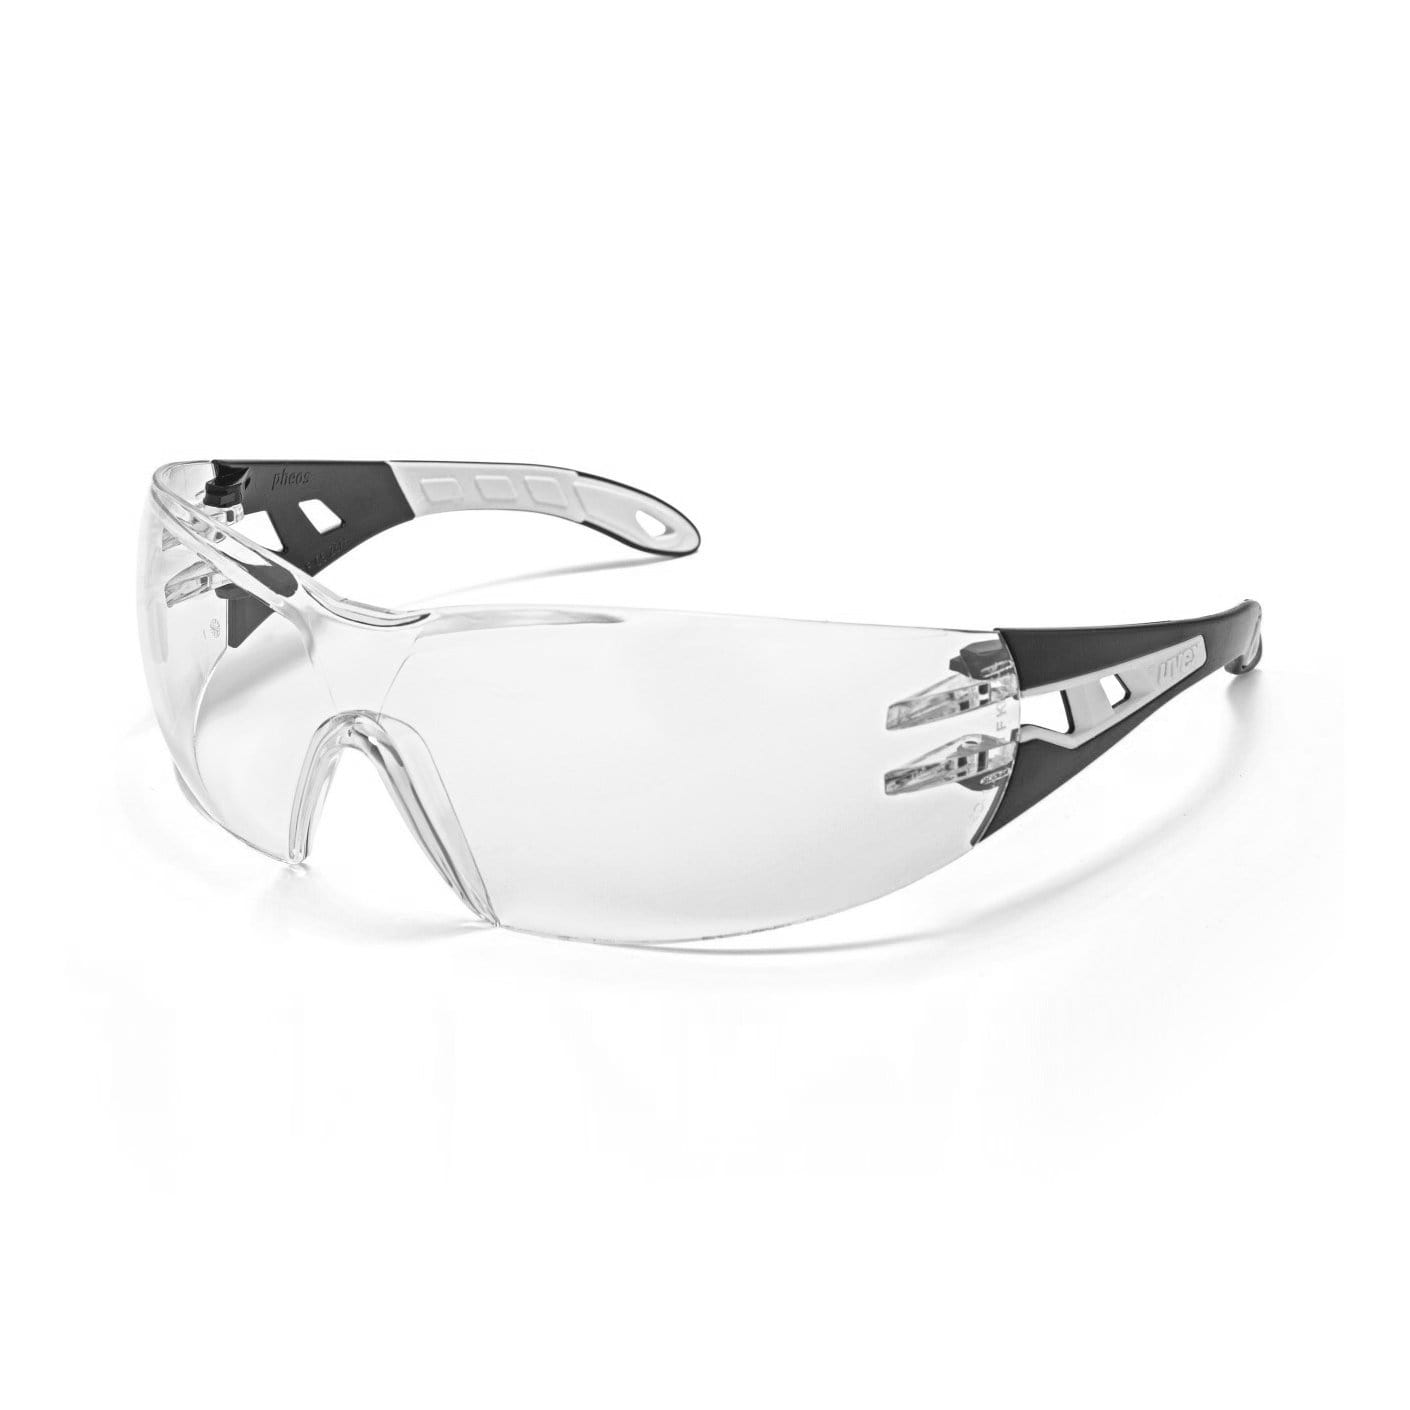 UVEX Pheos Eye Protection Spectacles